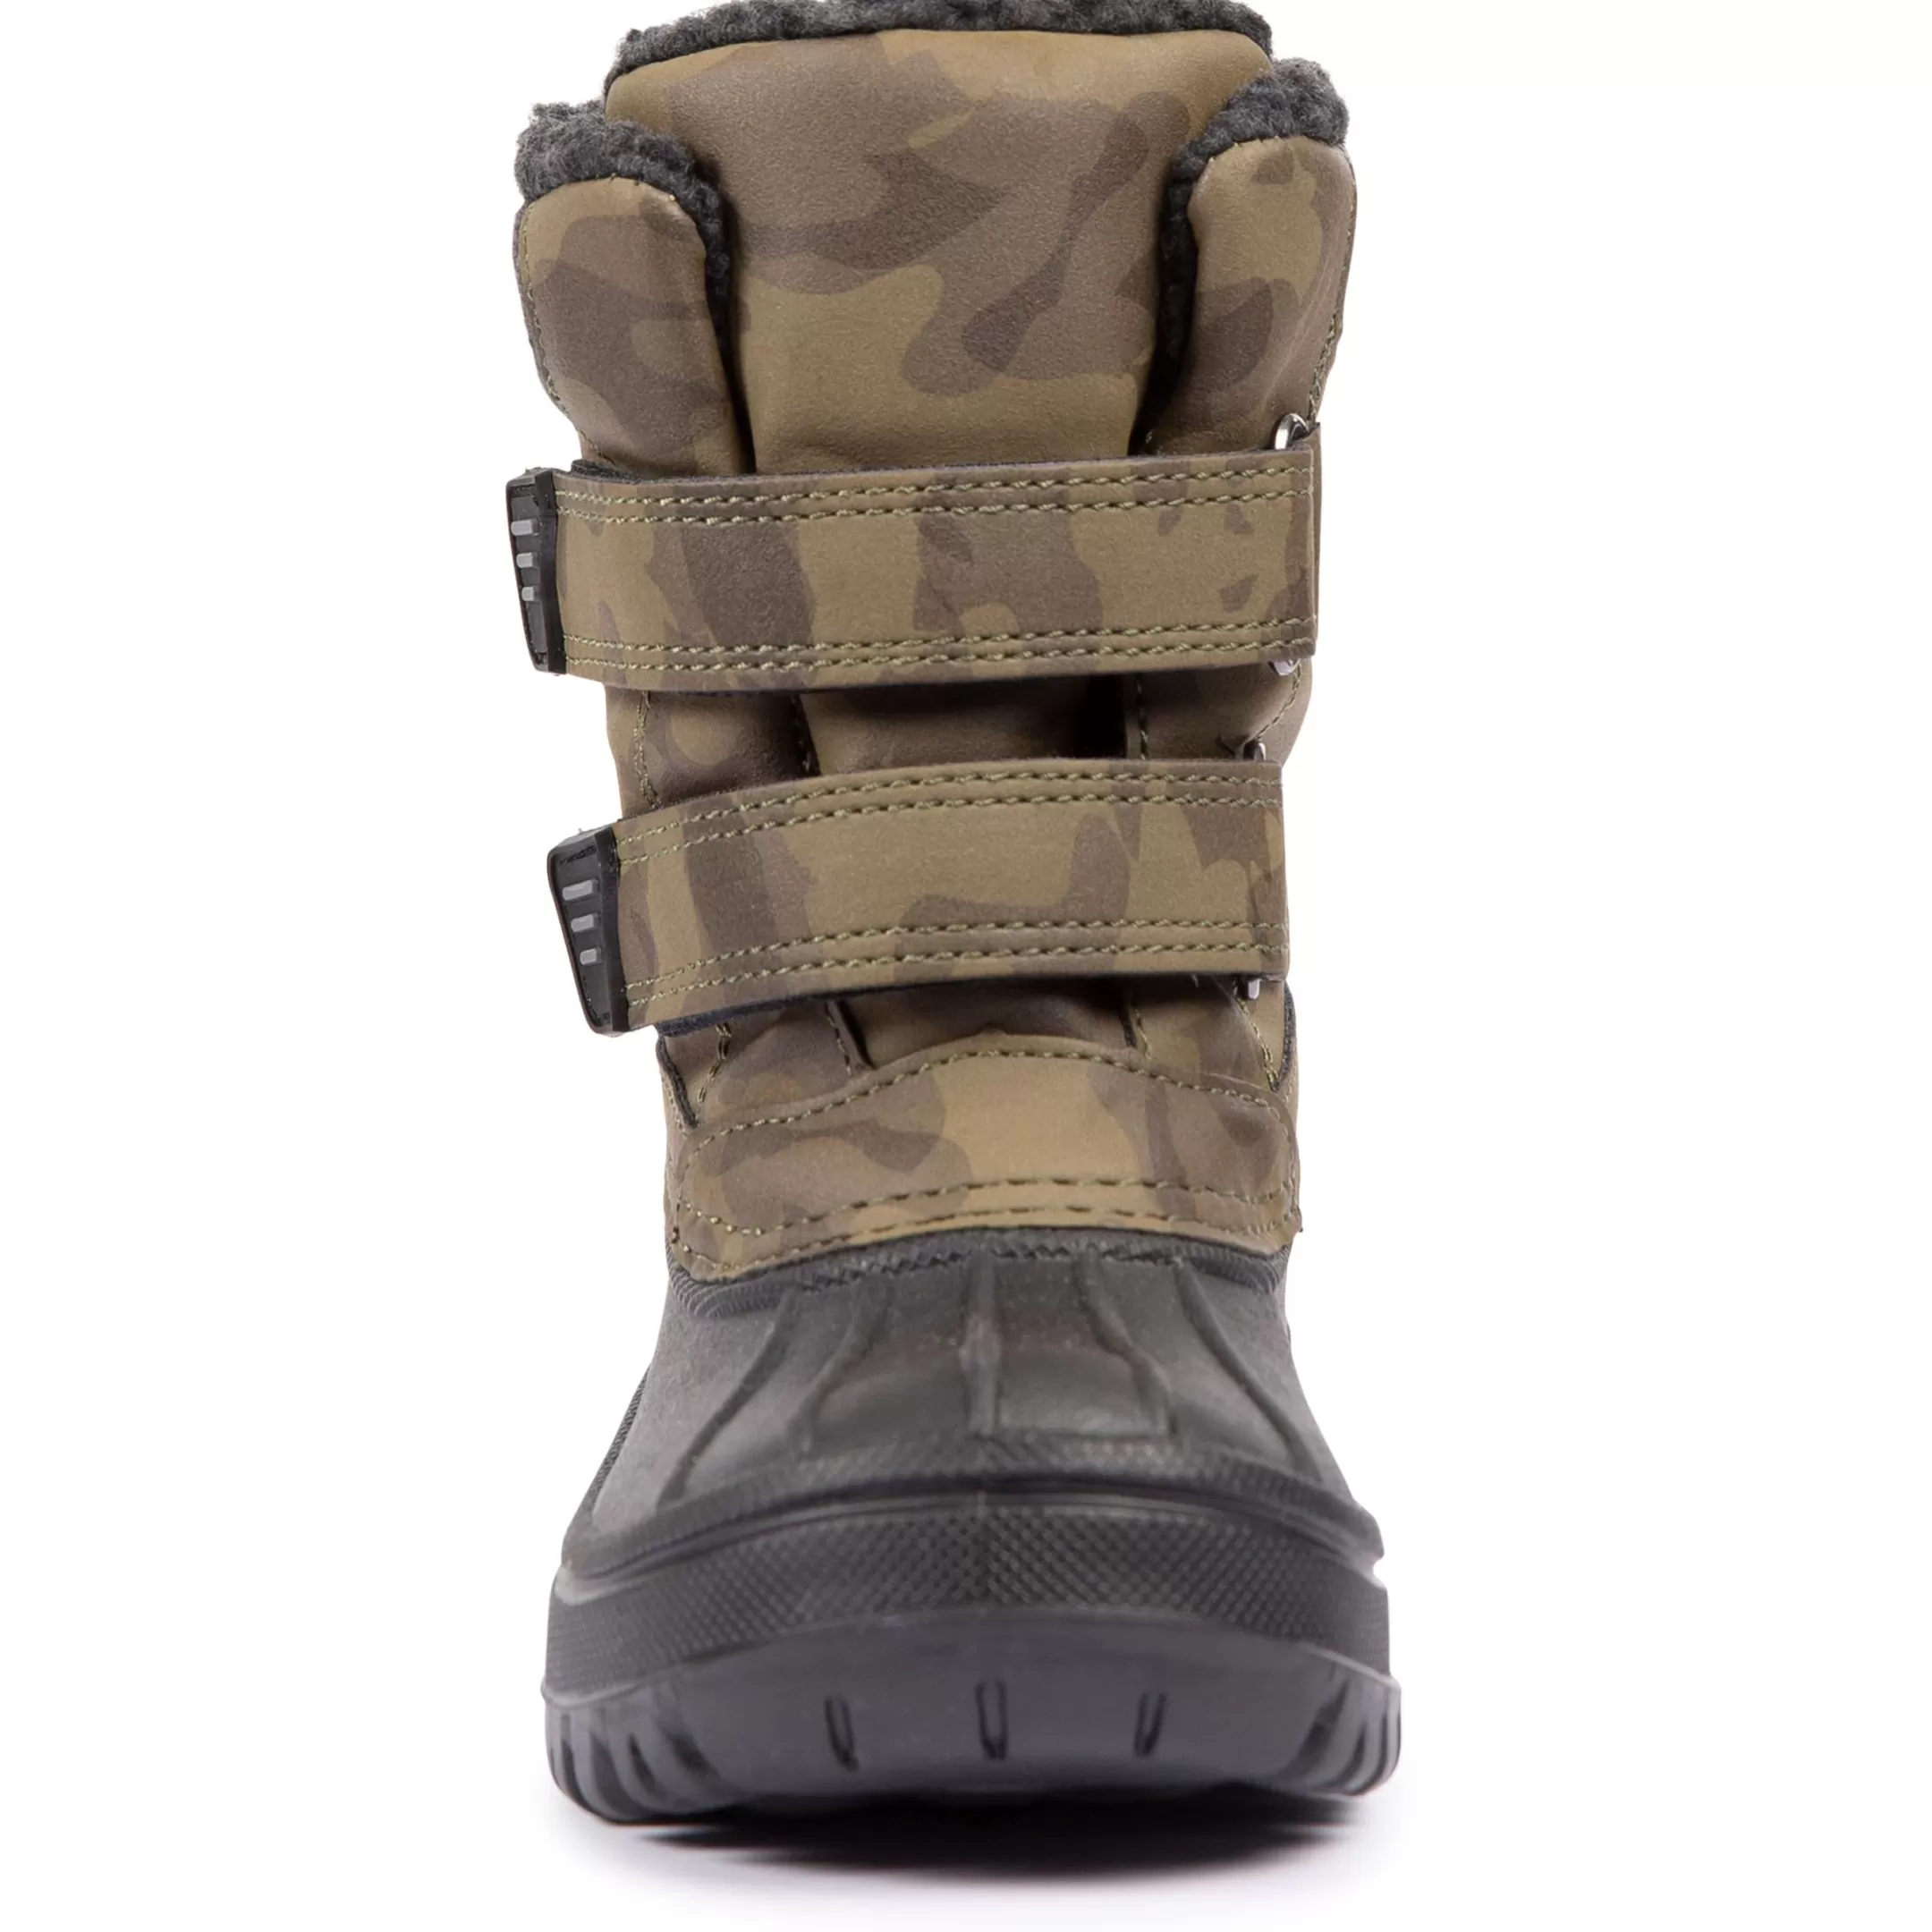 Toddlers' Unisex Snow Boots Alex | Trespass Outlet